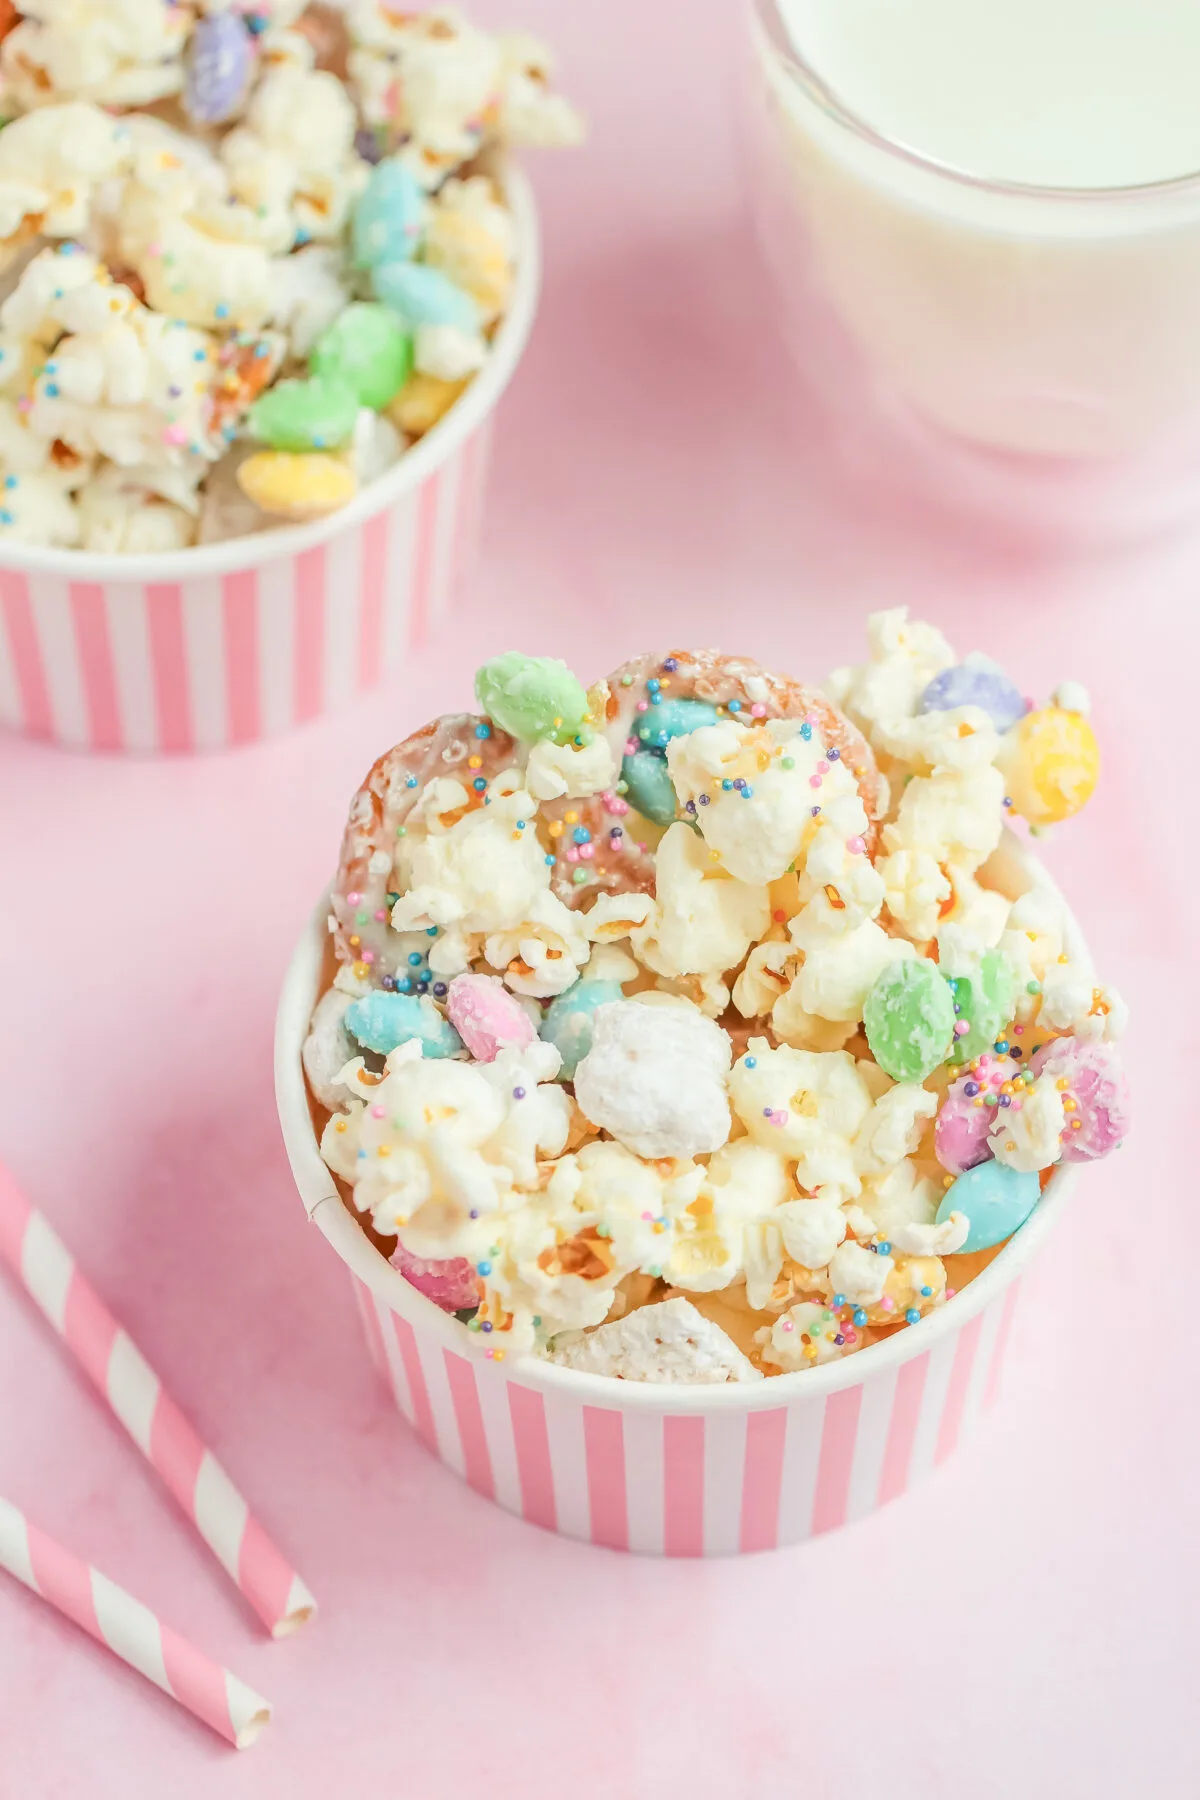 This bunny bait recipe is a tasty Easter snack mix made with popcorn, pastel M&M's, pretzels, white chocolate, sprinkles, and muddy buddies.